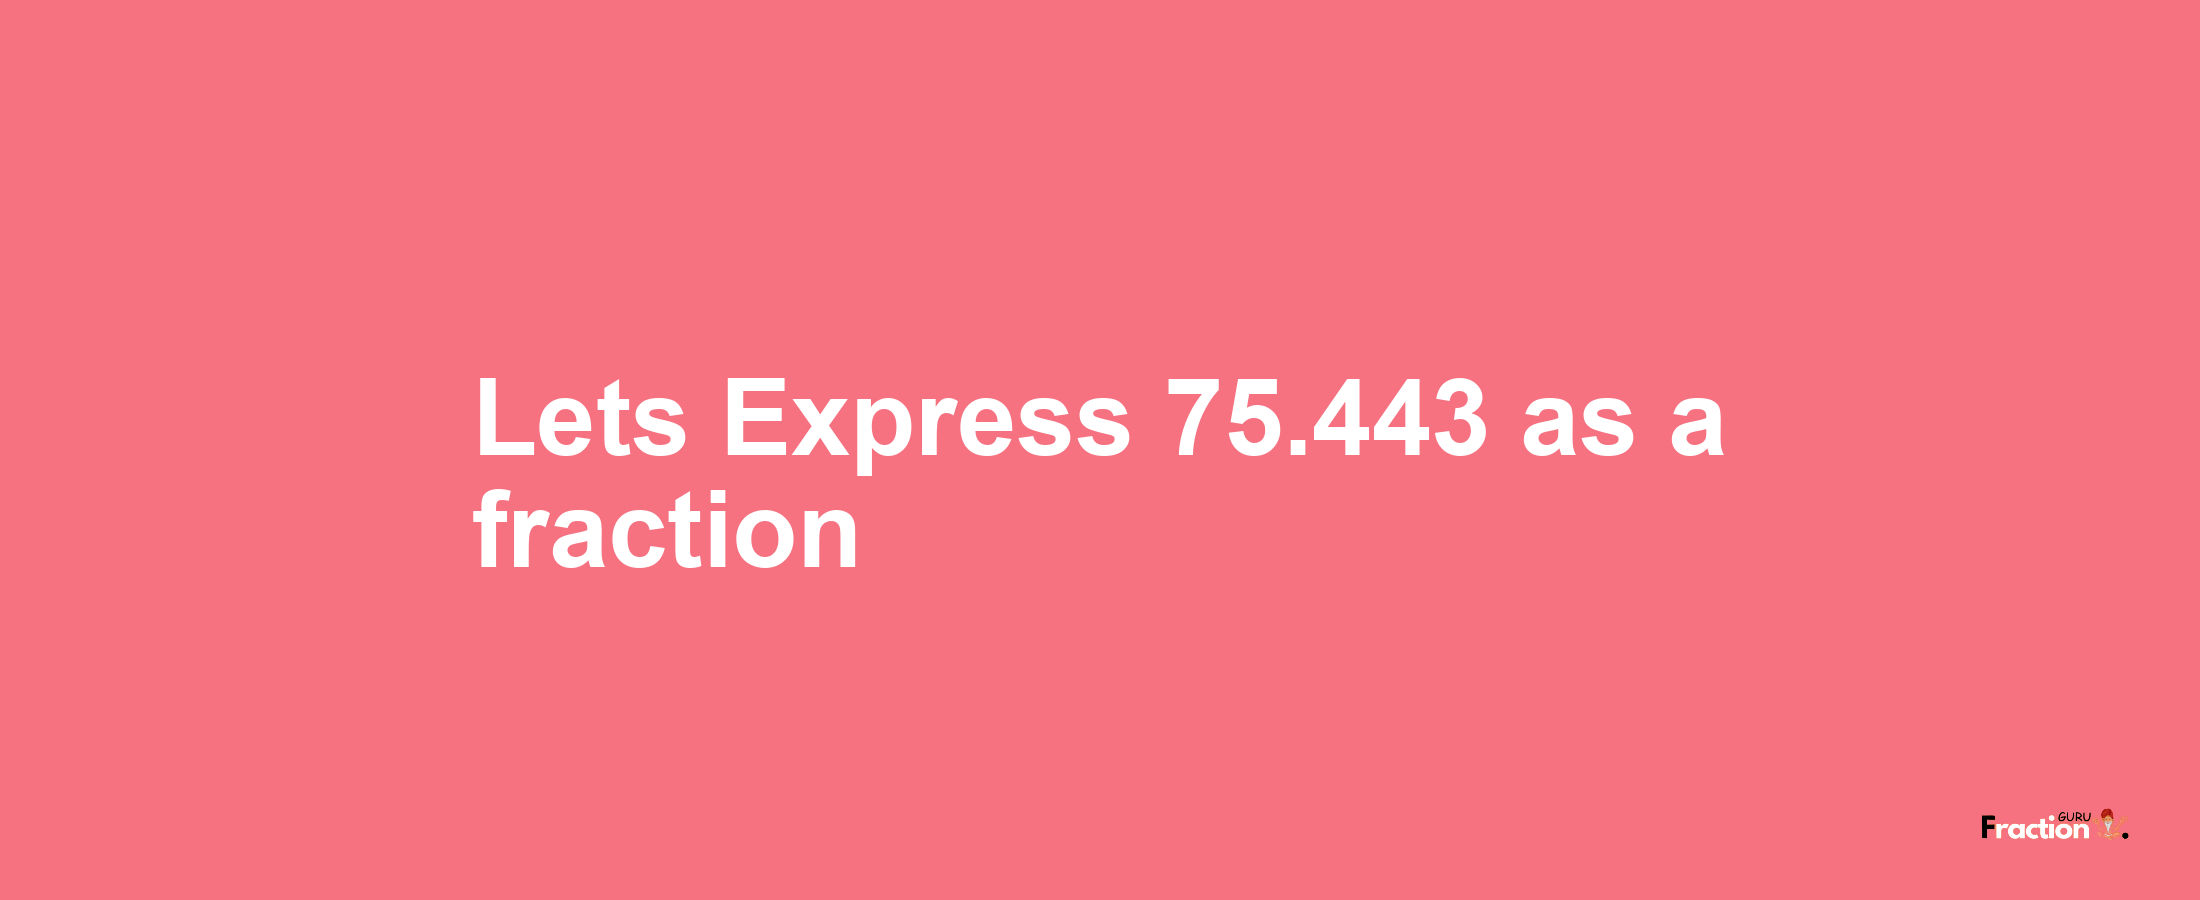 Lets Express 75.443 as afraction